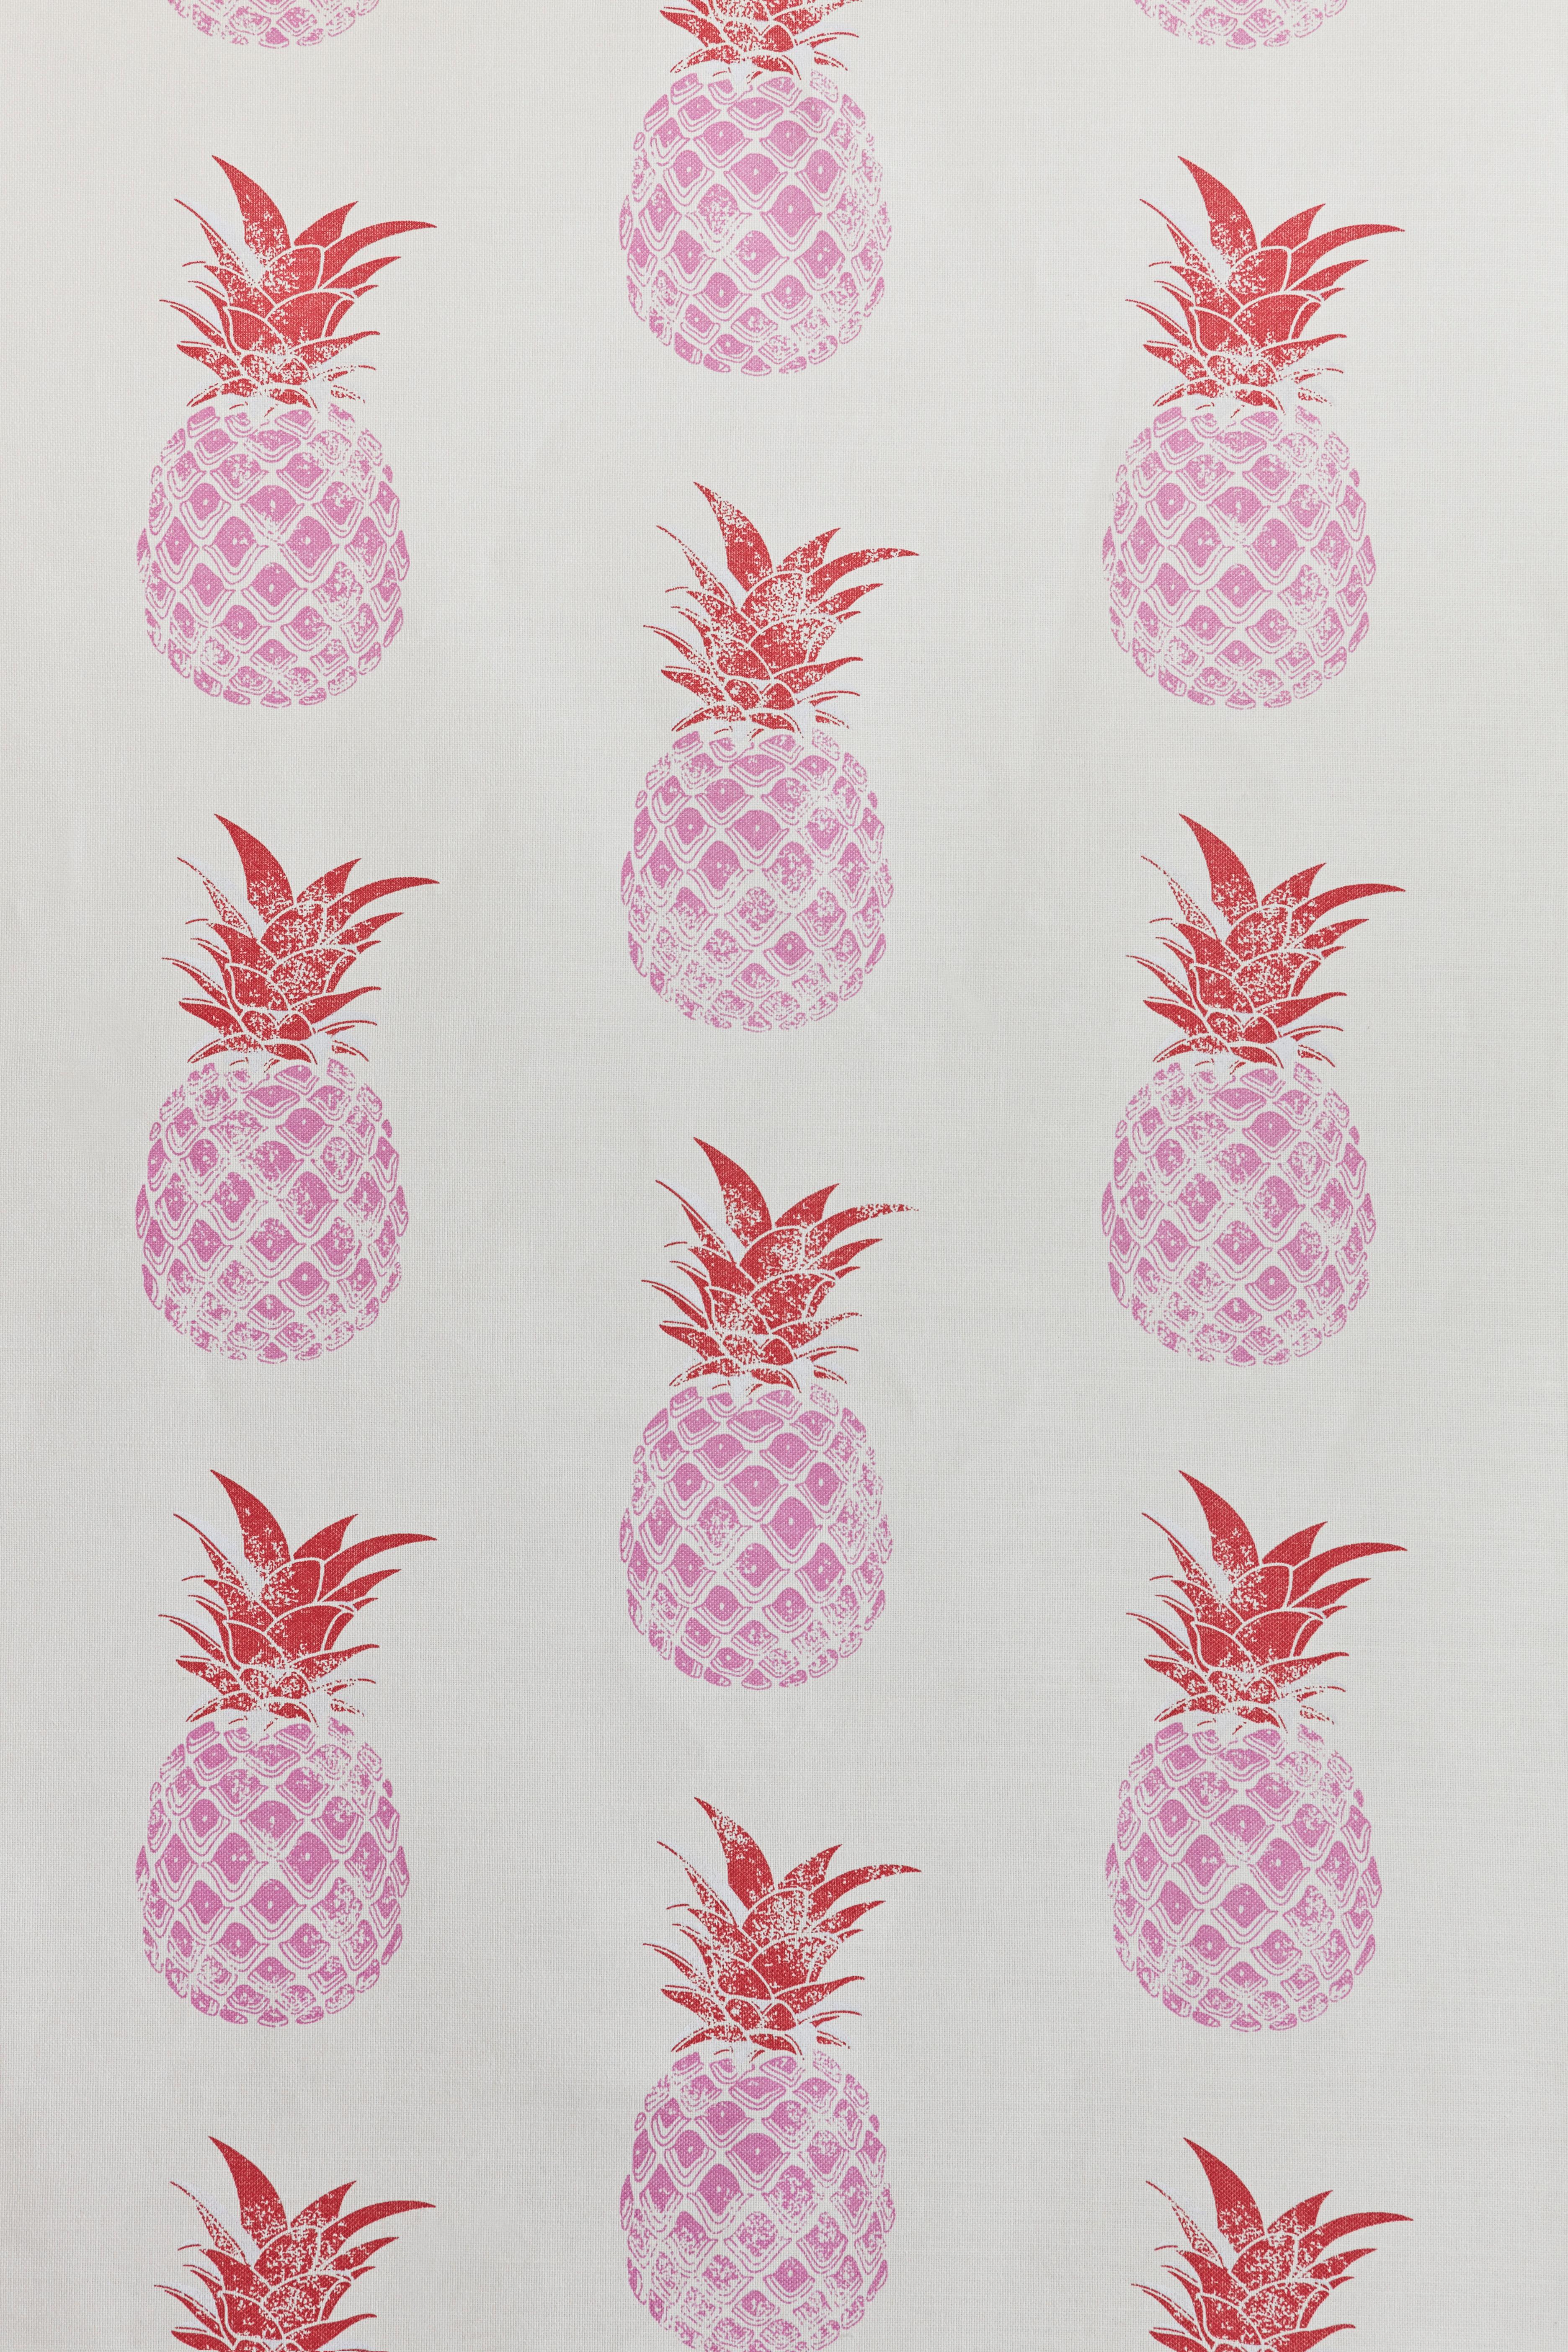 'Pineapple' Contemporary, Traditional Fabric in Gold on Charcoal For Sale 1